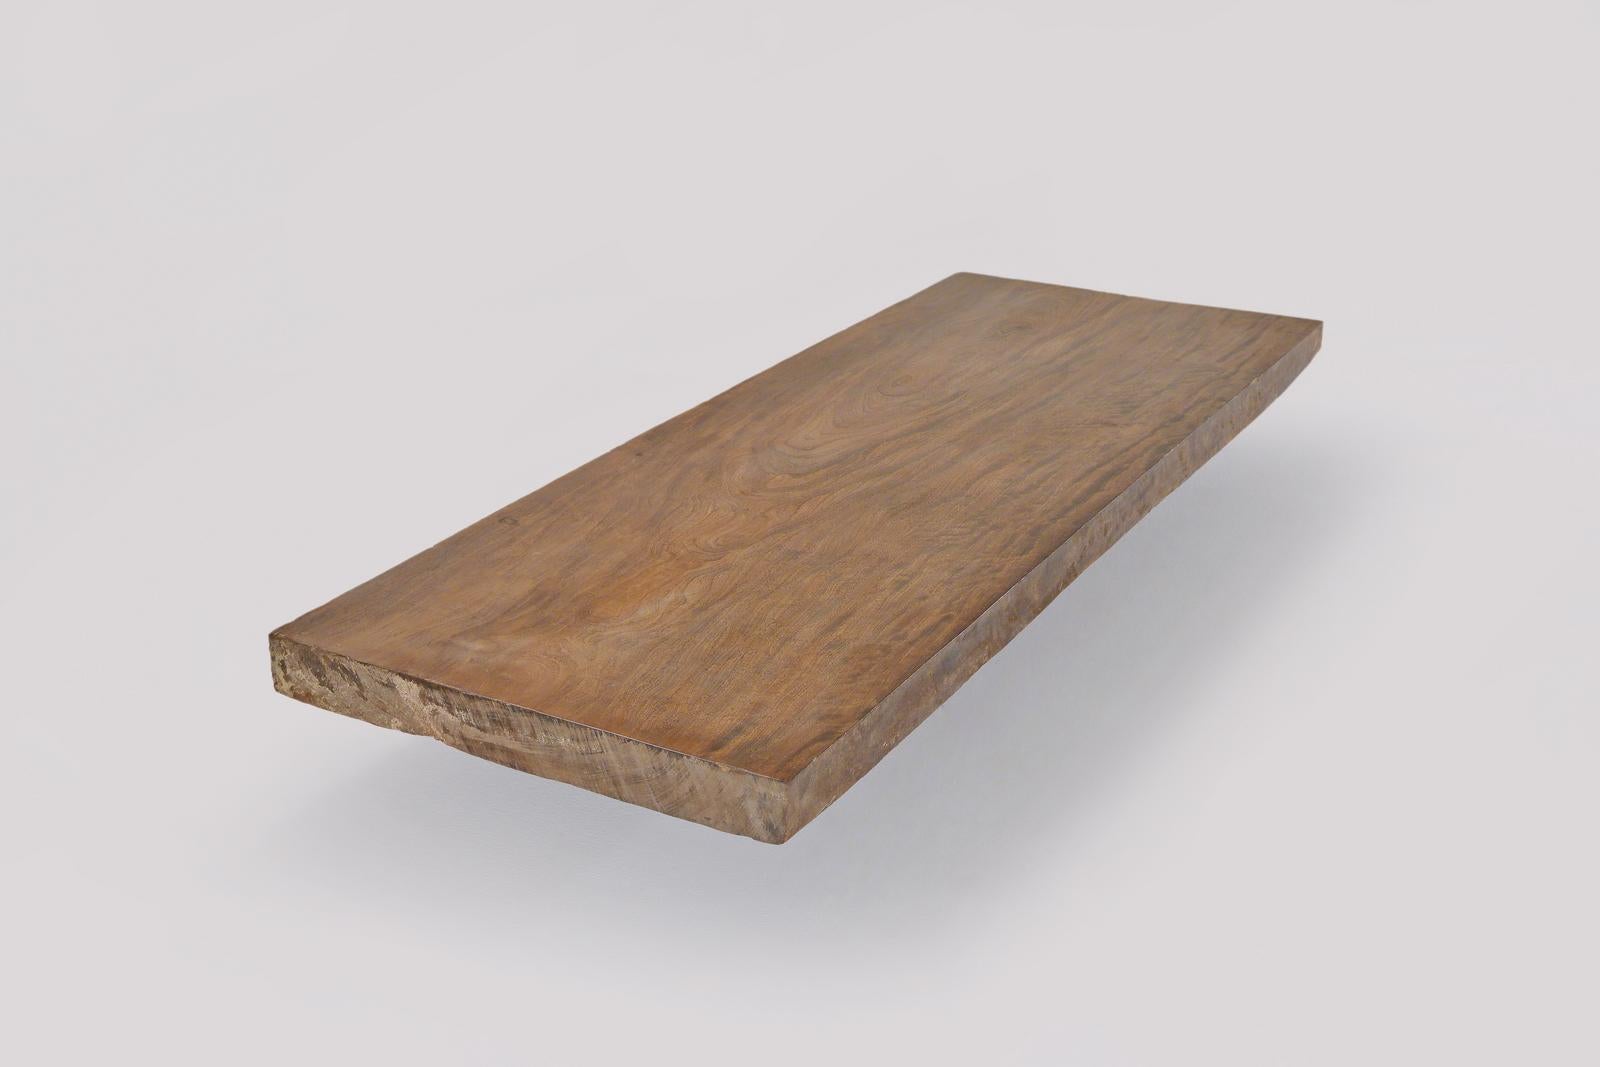 Model: ATOP_PT81_BS1_CW_BL_NO_edgeUN
Top: single slab of antique reclaimed hardwood
Top finish: Bleached and natural oil
Base: PT81 sand cast brass
Base finish golden sand
Dimensions: 215 x 79.5 x 24 cm
(W x D x H) 86.6 x 41.3 x 9.7 inch

P.